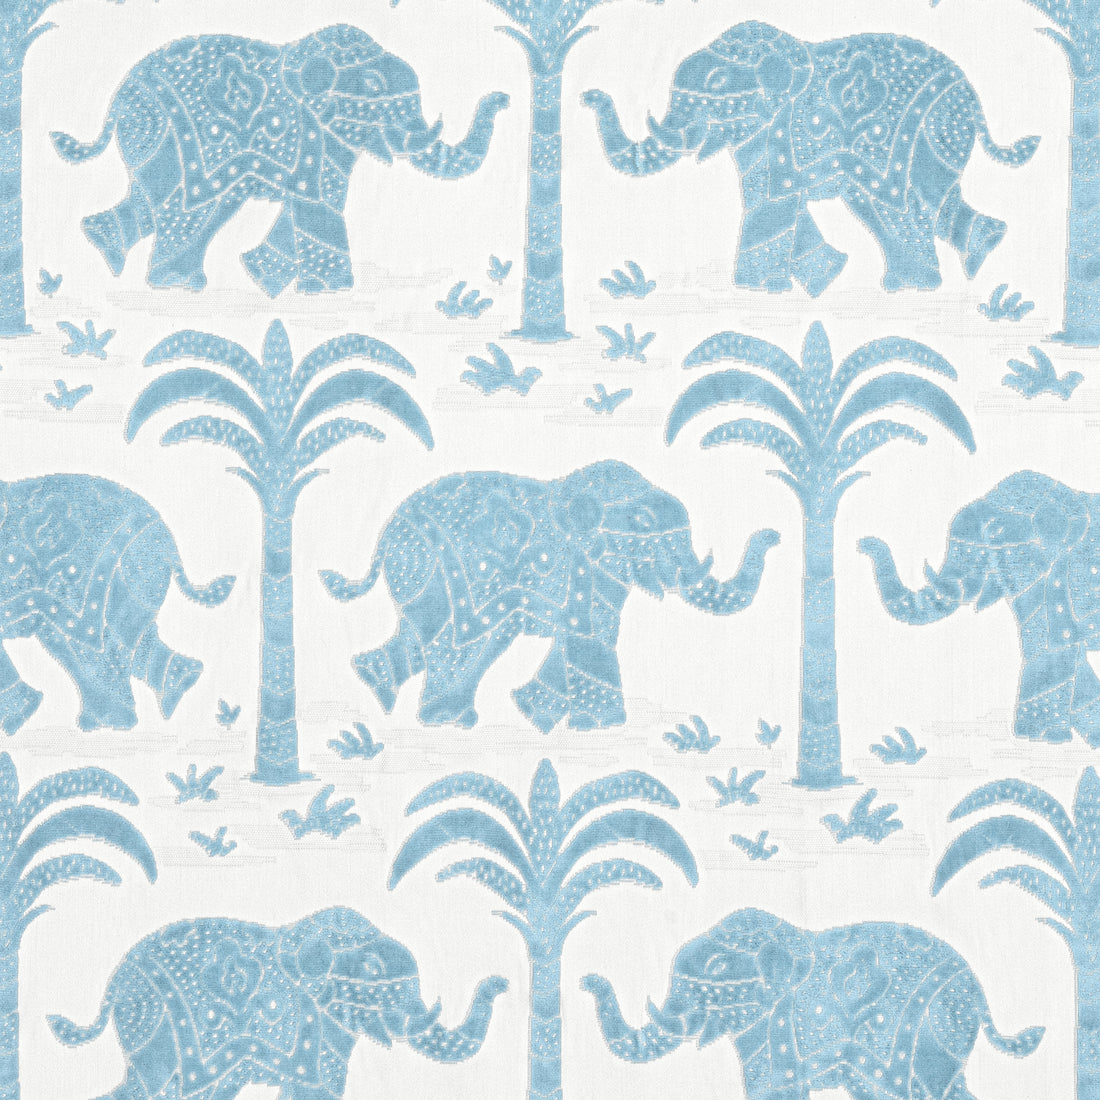 Elephant Velvet fabric in french blue color - pattern number W716204 - by Thibaut in the Kismet collection